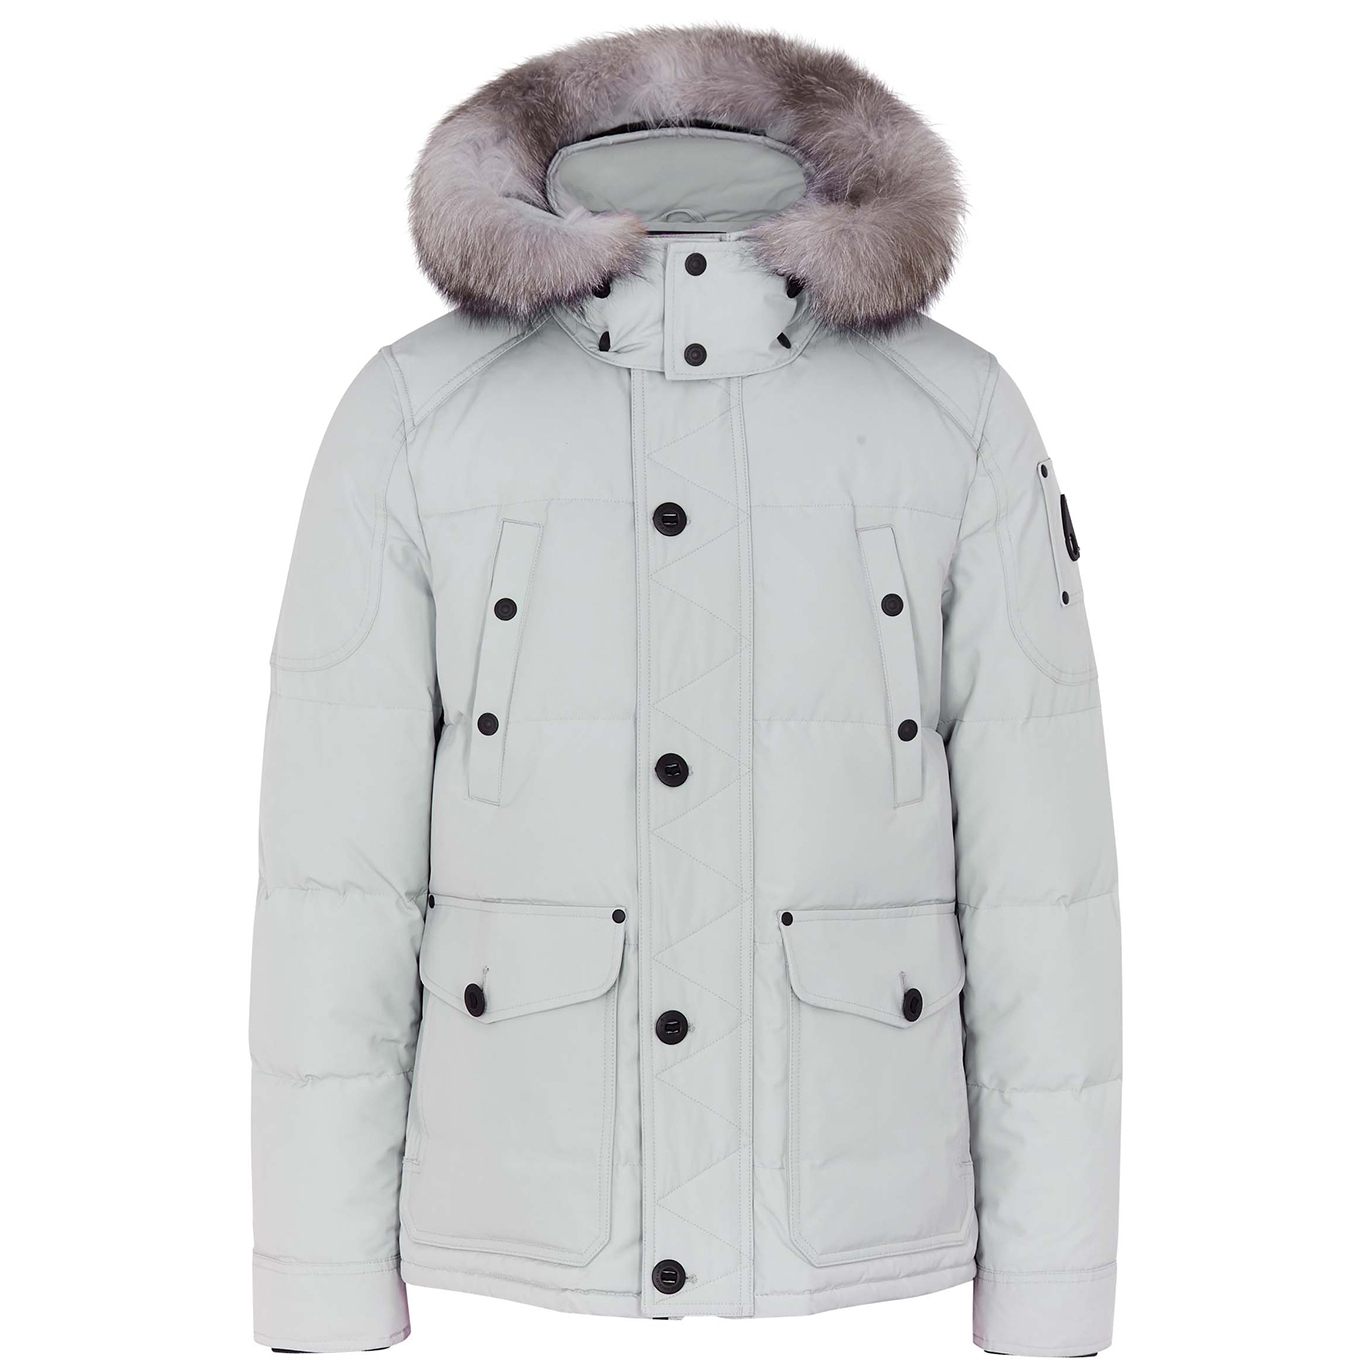 Moose Knuckles Round Island grey quilted shell jacket - Harvey Nichols